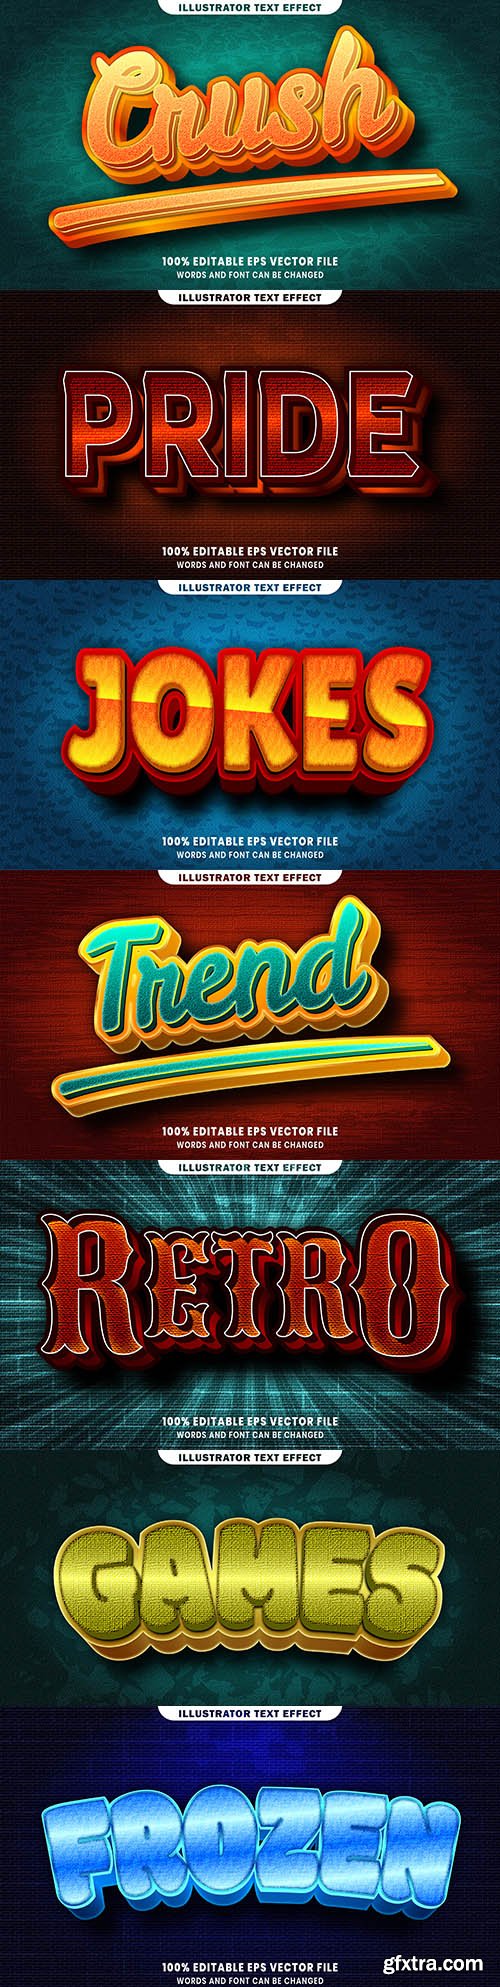 Editable font and 3d effect text design collection illustration 62